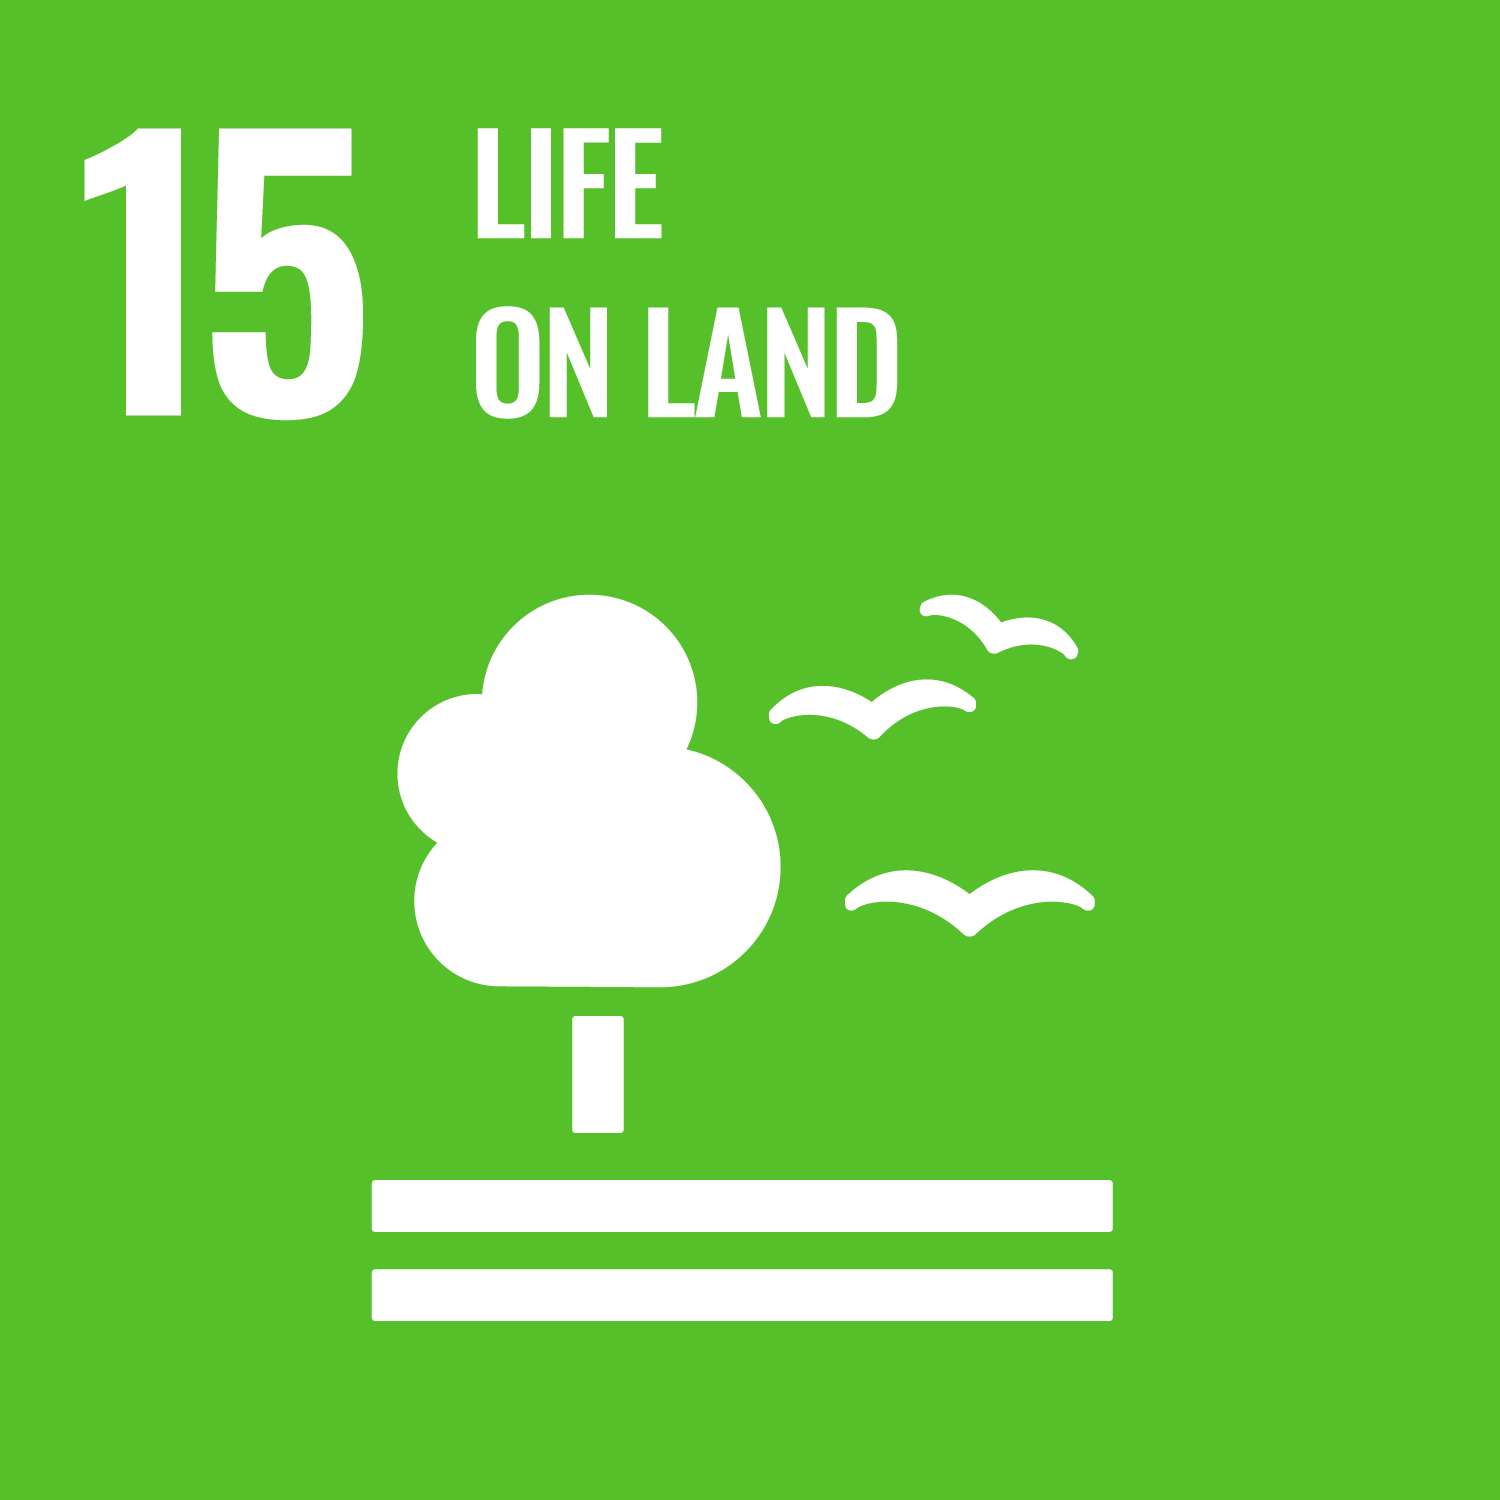 United Nation's 17 Sustainable Development Goals goal number 15